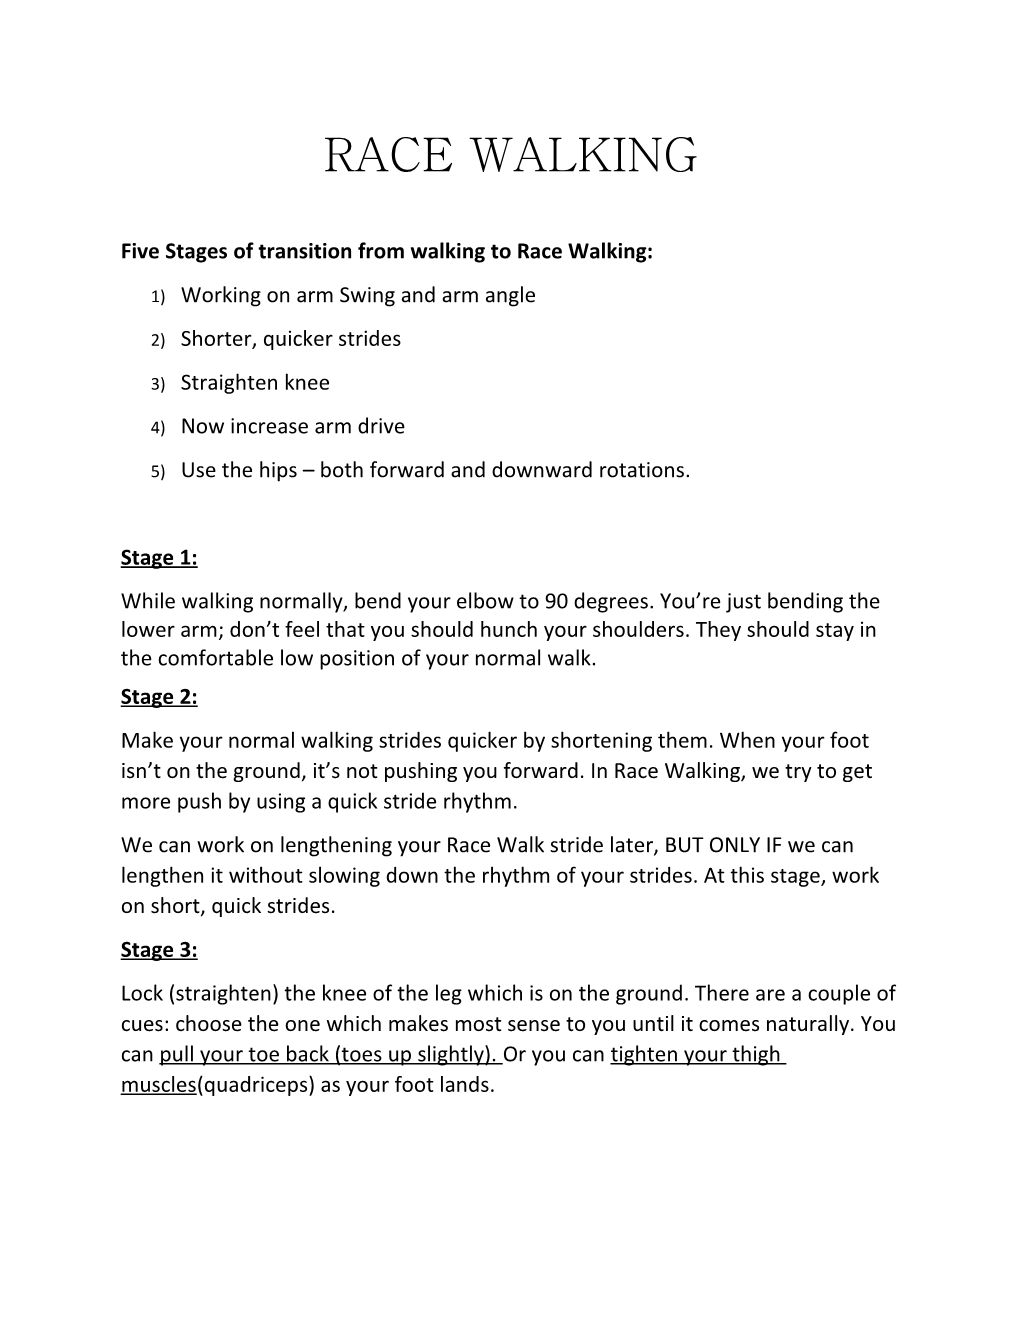 Five Stages of Transition from Walking to Race Walking